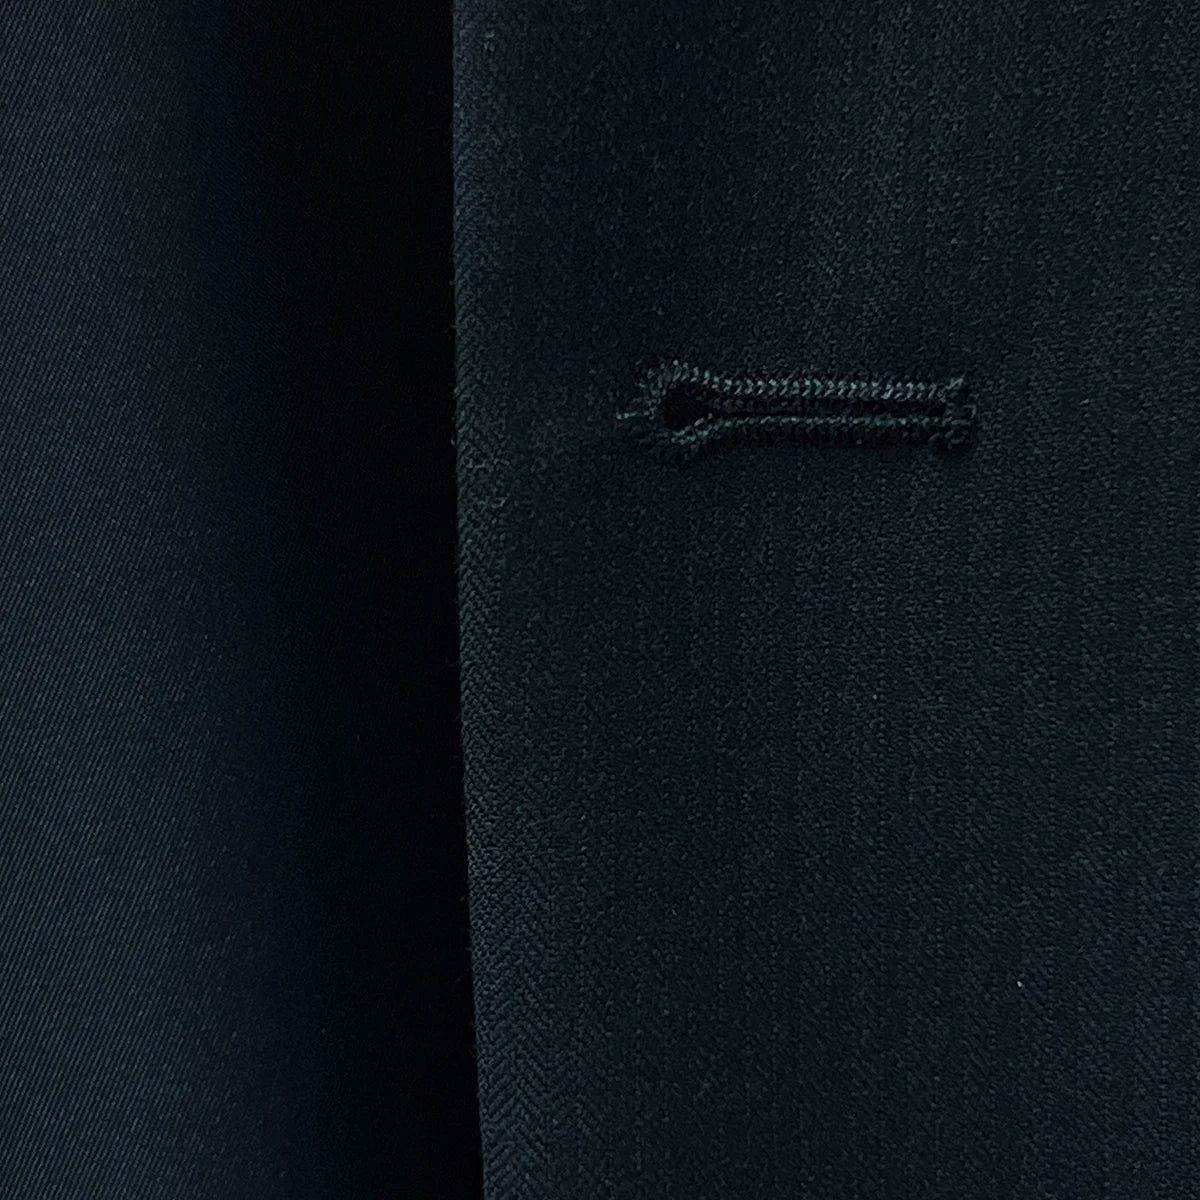 Close-up of the intricate buttonhole detail on black herringbone fabric.